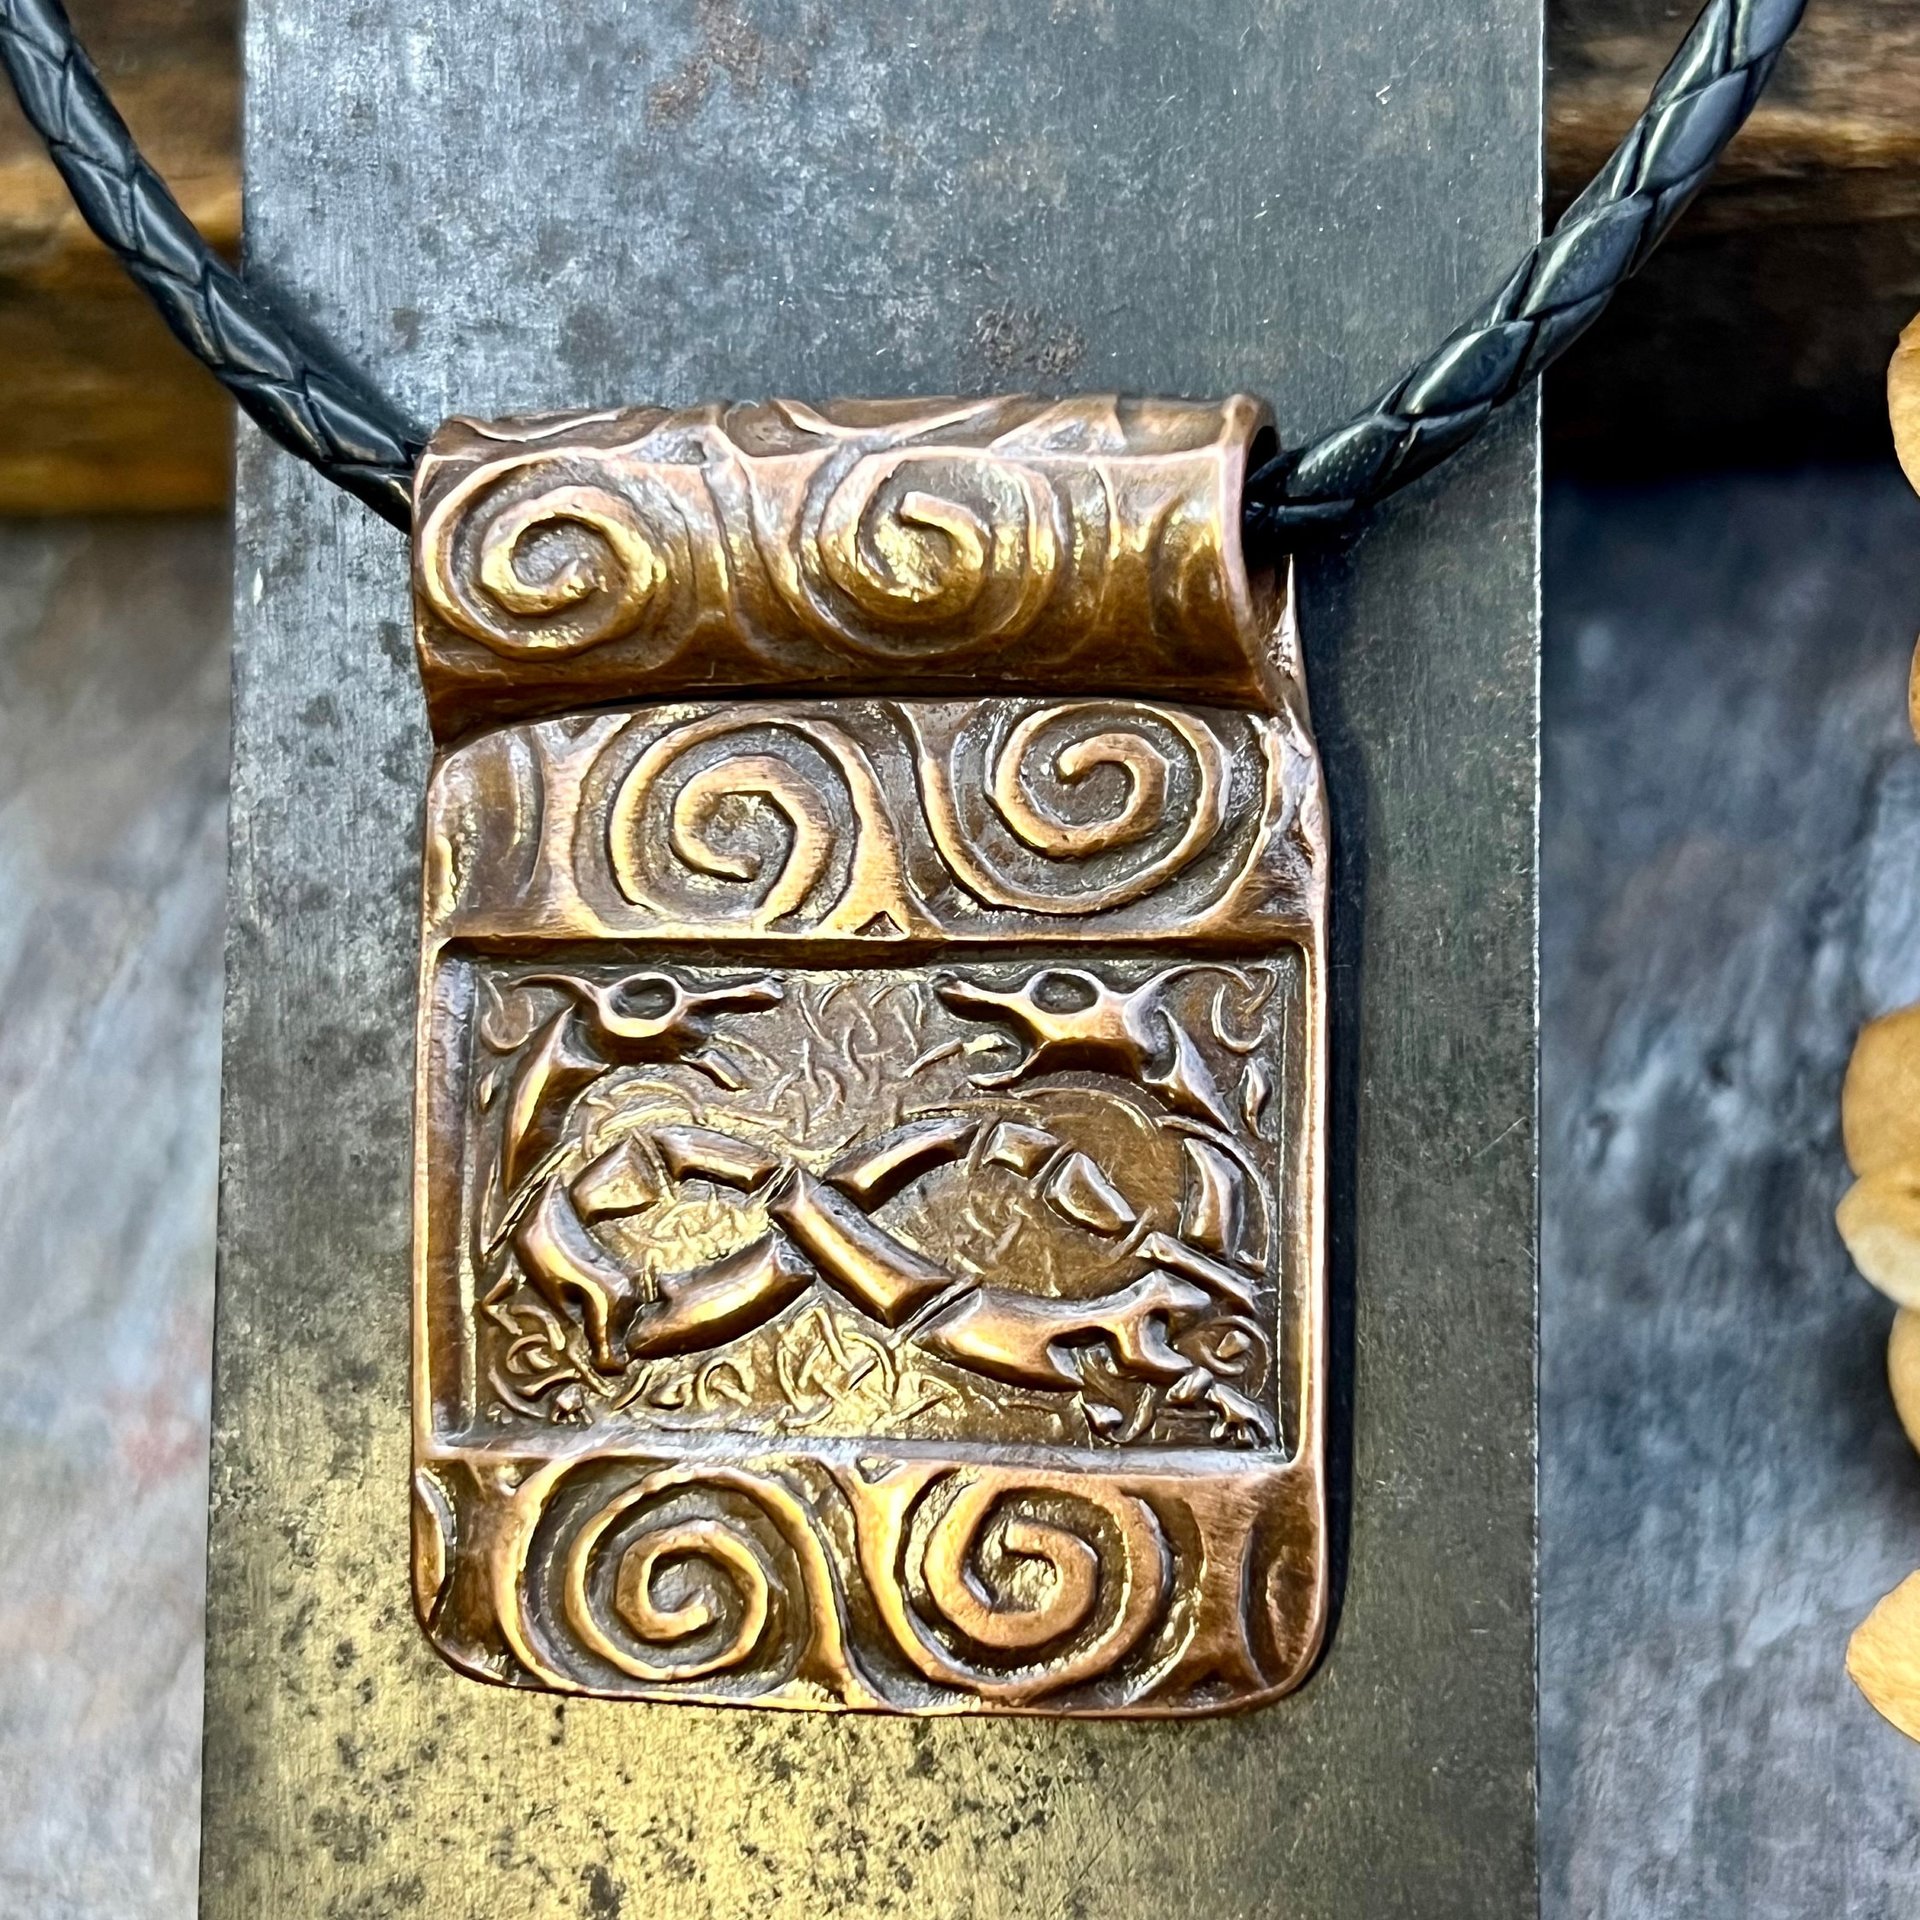 Celtic Hounds, Copper Pendant, Irish Celtic Jewelry, Celtic Knots Spirals, Earthy Rustic Jewelry, Leather Vegan Cords, Irish Dogs Wolfhounds